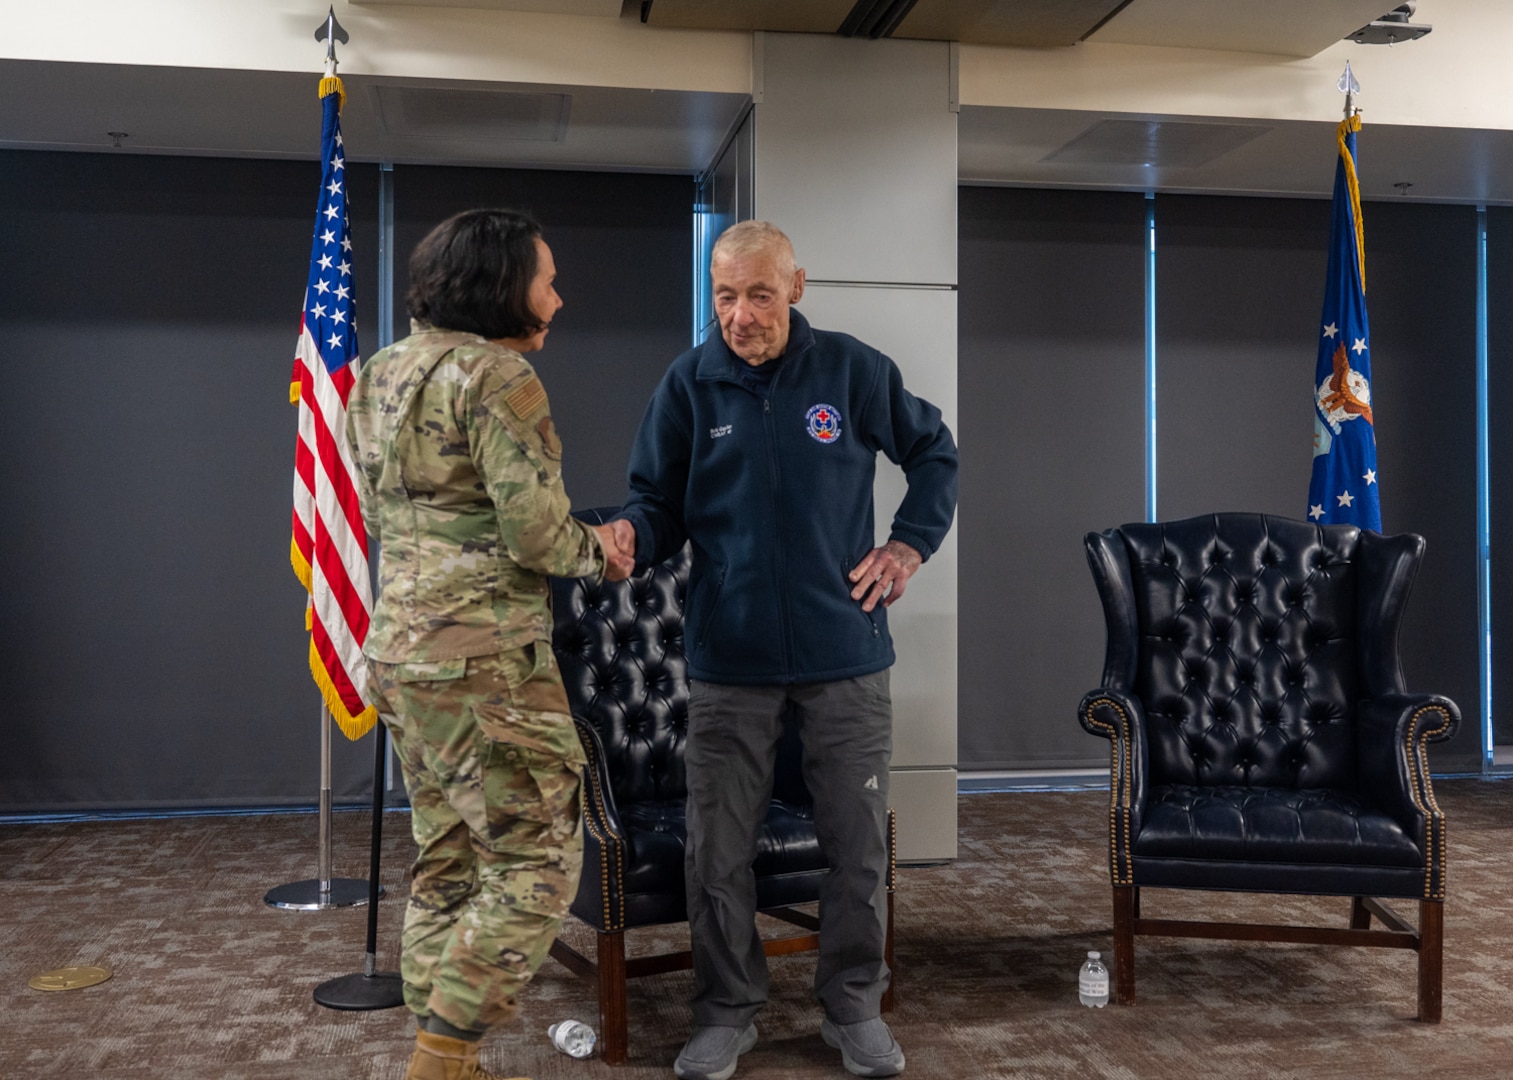 Brig. Gen. Jeannine Ryder, 59th Medical Wing commander, coins Chief Master Sergeant of the Air Force #5 (ret.) Robert Gaylor at Wilford Hall Ambulatory Surgical Center, Joint Base San Antonio-Lackland, Texas, Aug. 2, 2023. In 1957, Gaylor had the opportunity to be a Military Training Instructor and after working as an MTI for male flights, was selected as the senior training noncommissioned officer for the 4734th Women in the Air Force basic training squadron. (U.S. Air Force photo by Senior Airman Melody Bordeaux)